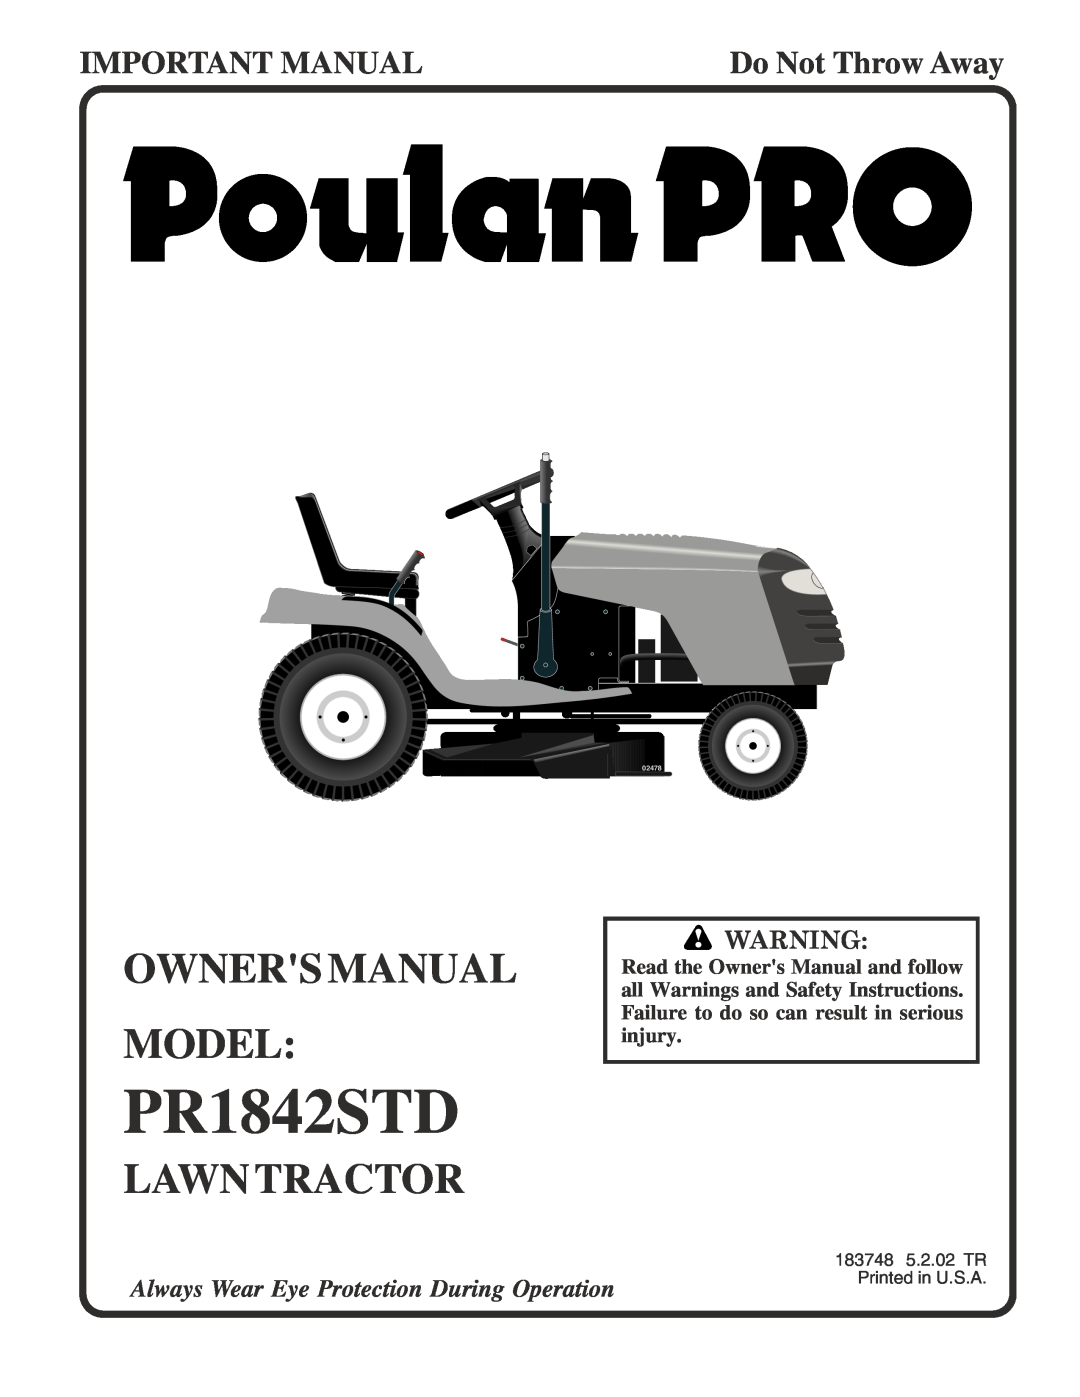 Poulan PR1842STD owner manual Lawntractor, Important Manual, Do Not Throw Away, 02478 